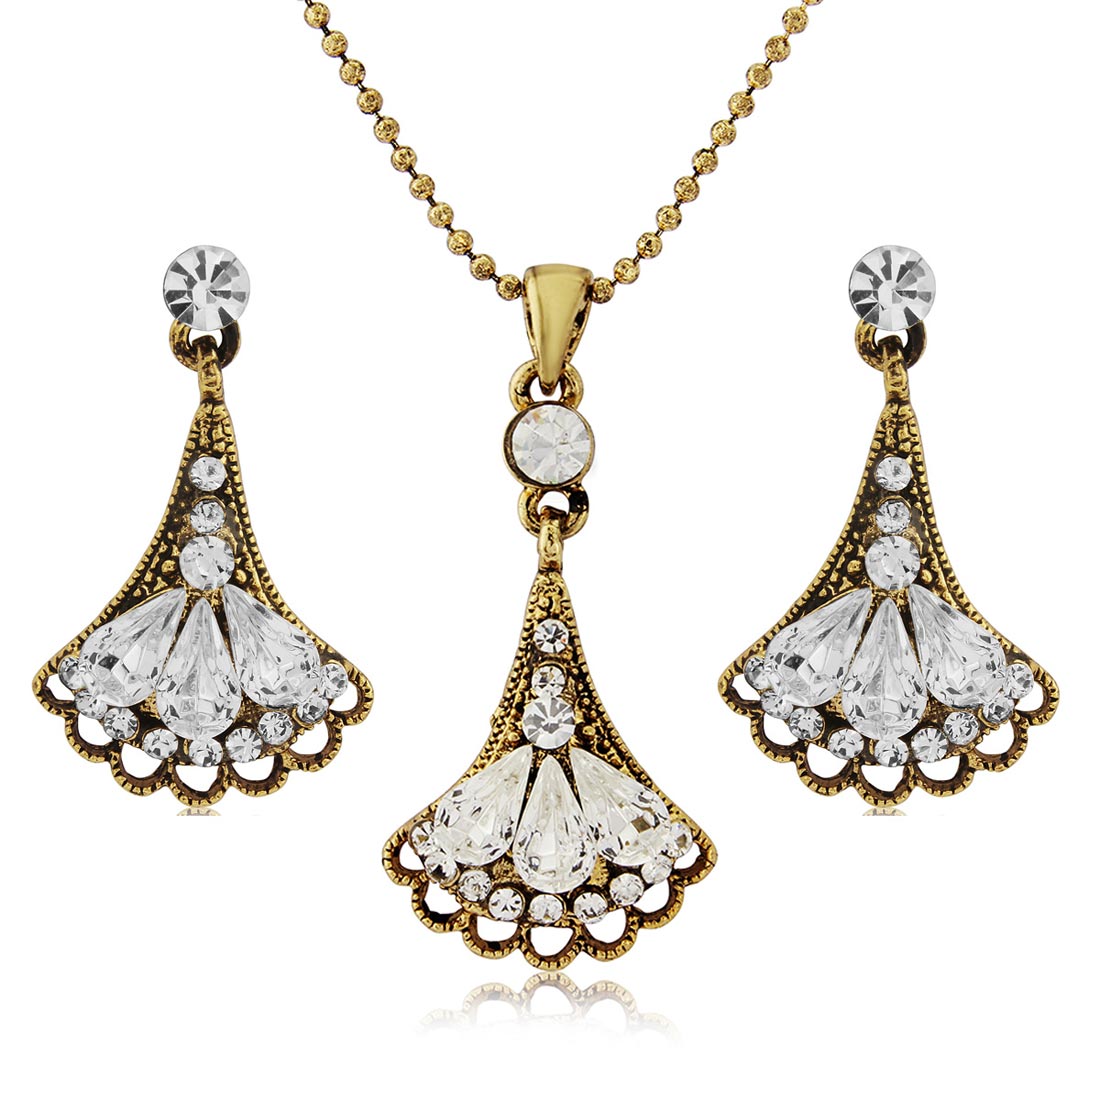 Glamour of Deco Jewellery Set featuring fan earrings and pendant